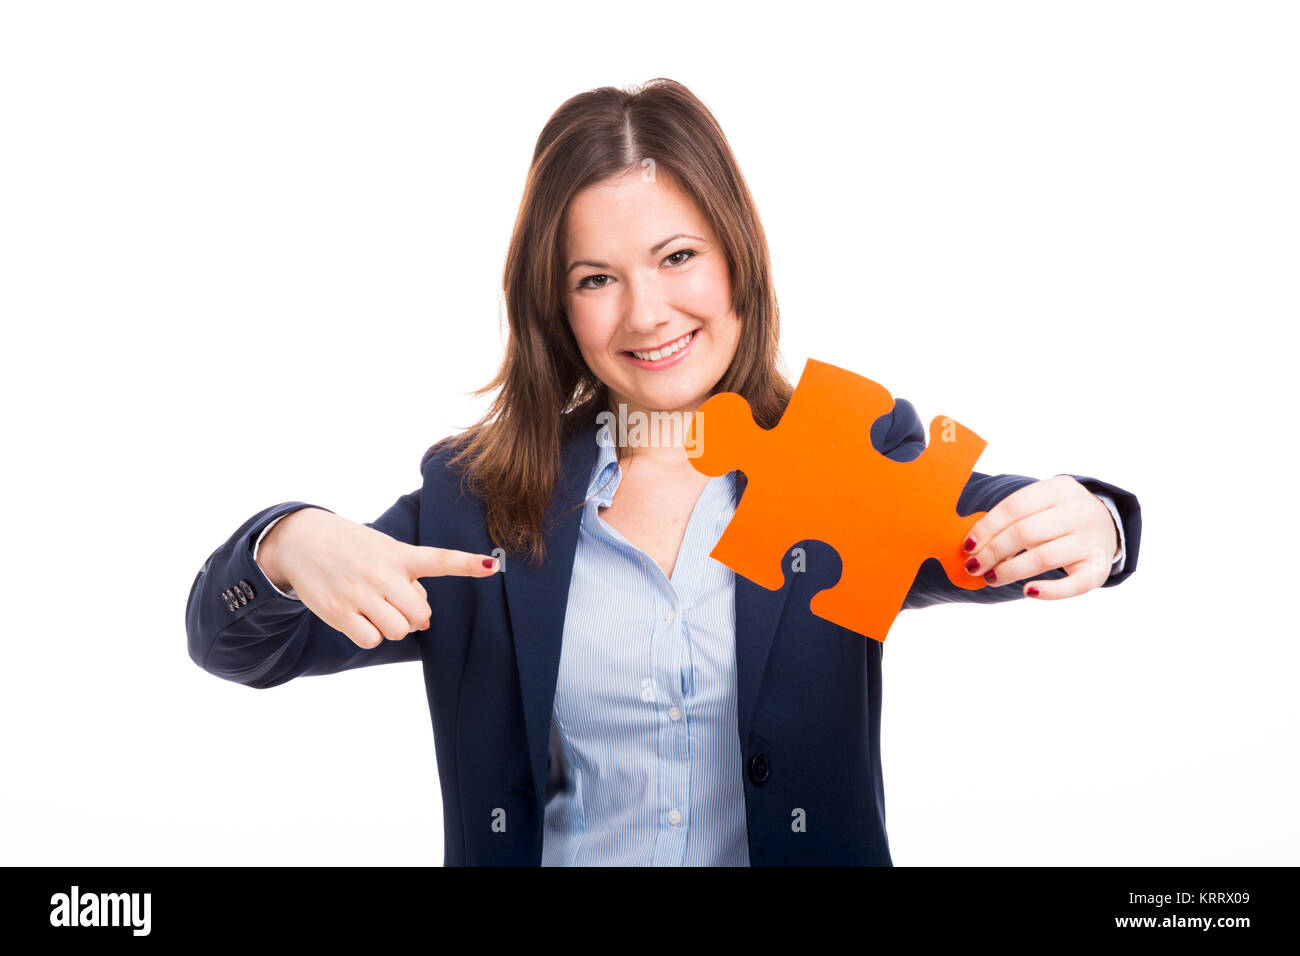 Business woman holding a puzzle piece Stock Photo